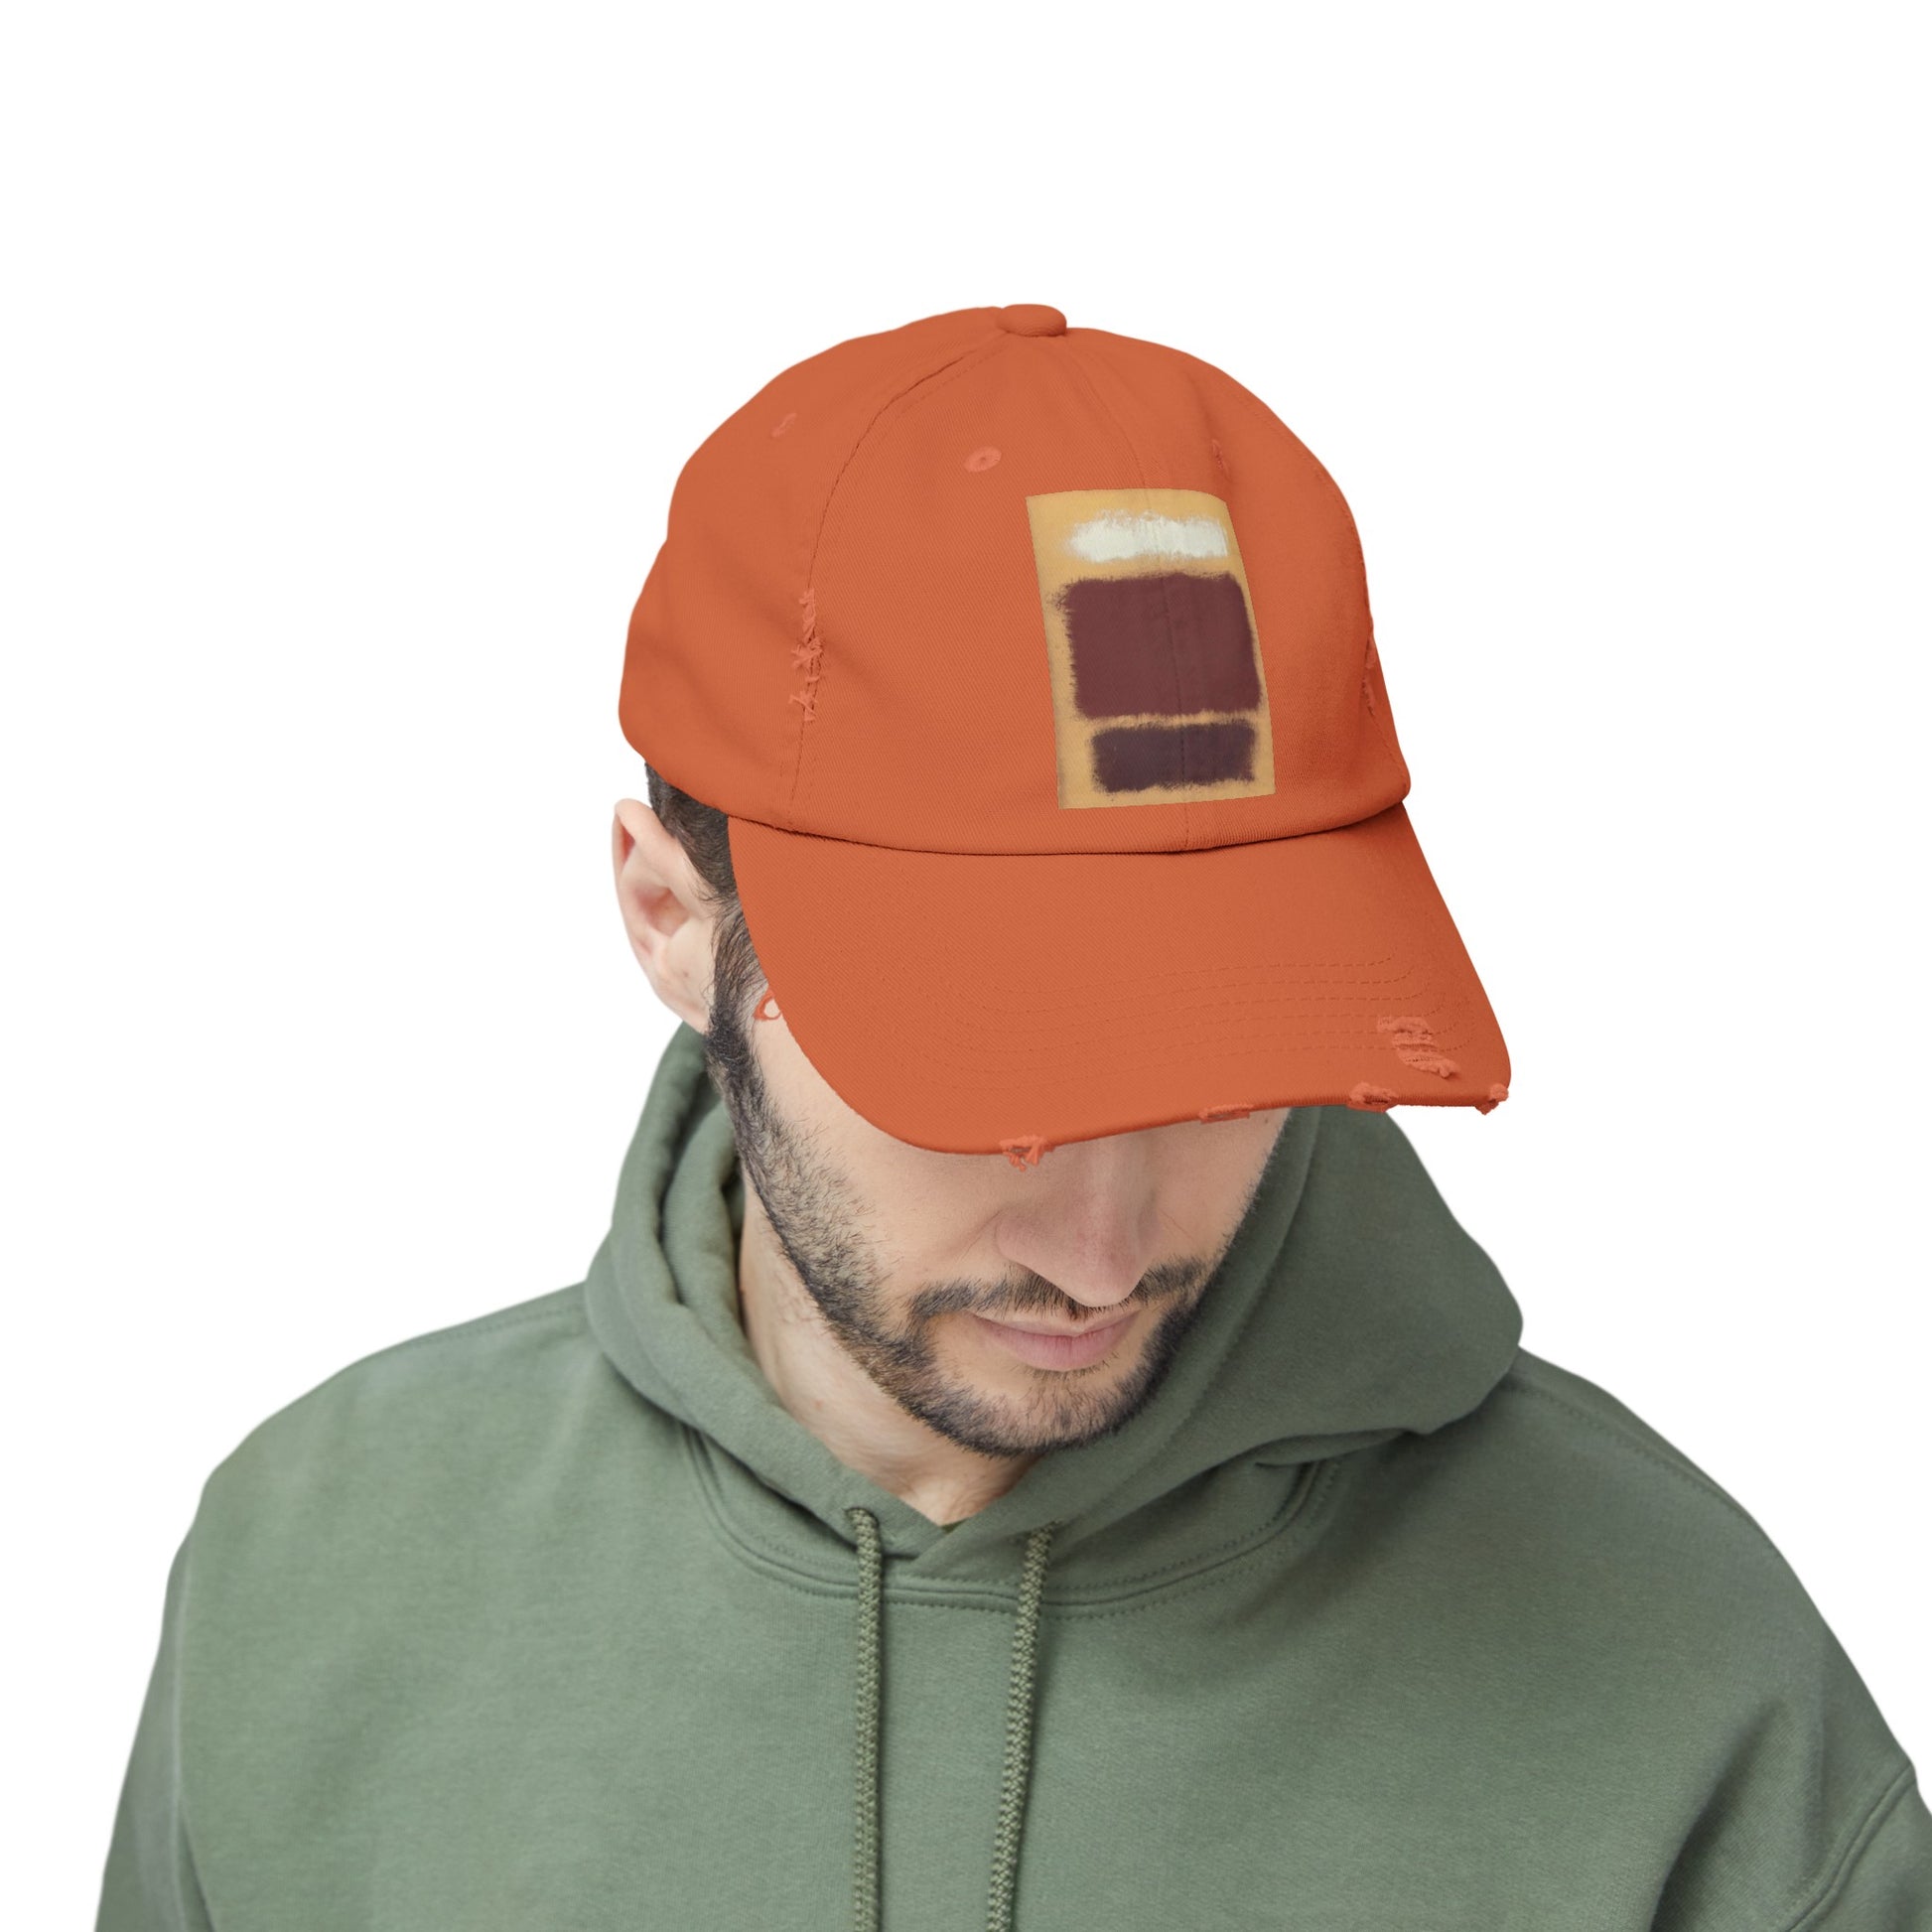 a man wearing an orange hat with a patch on it